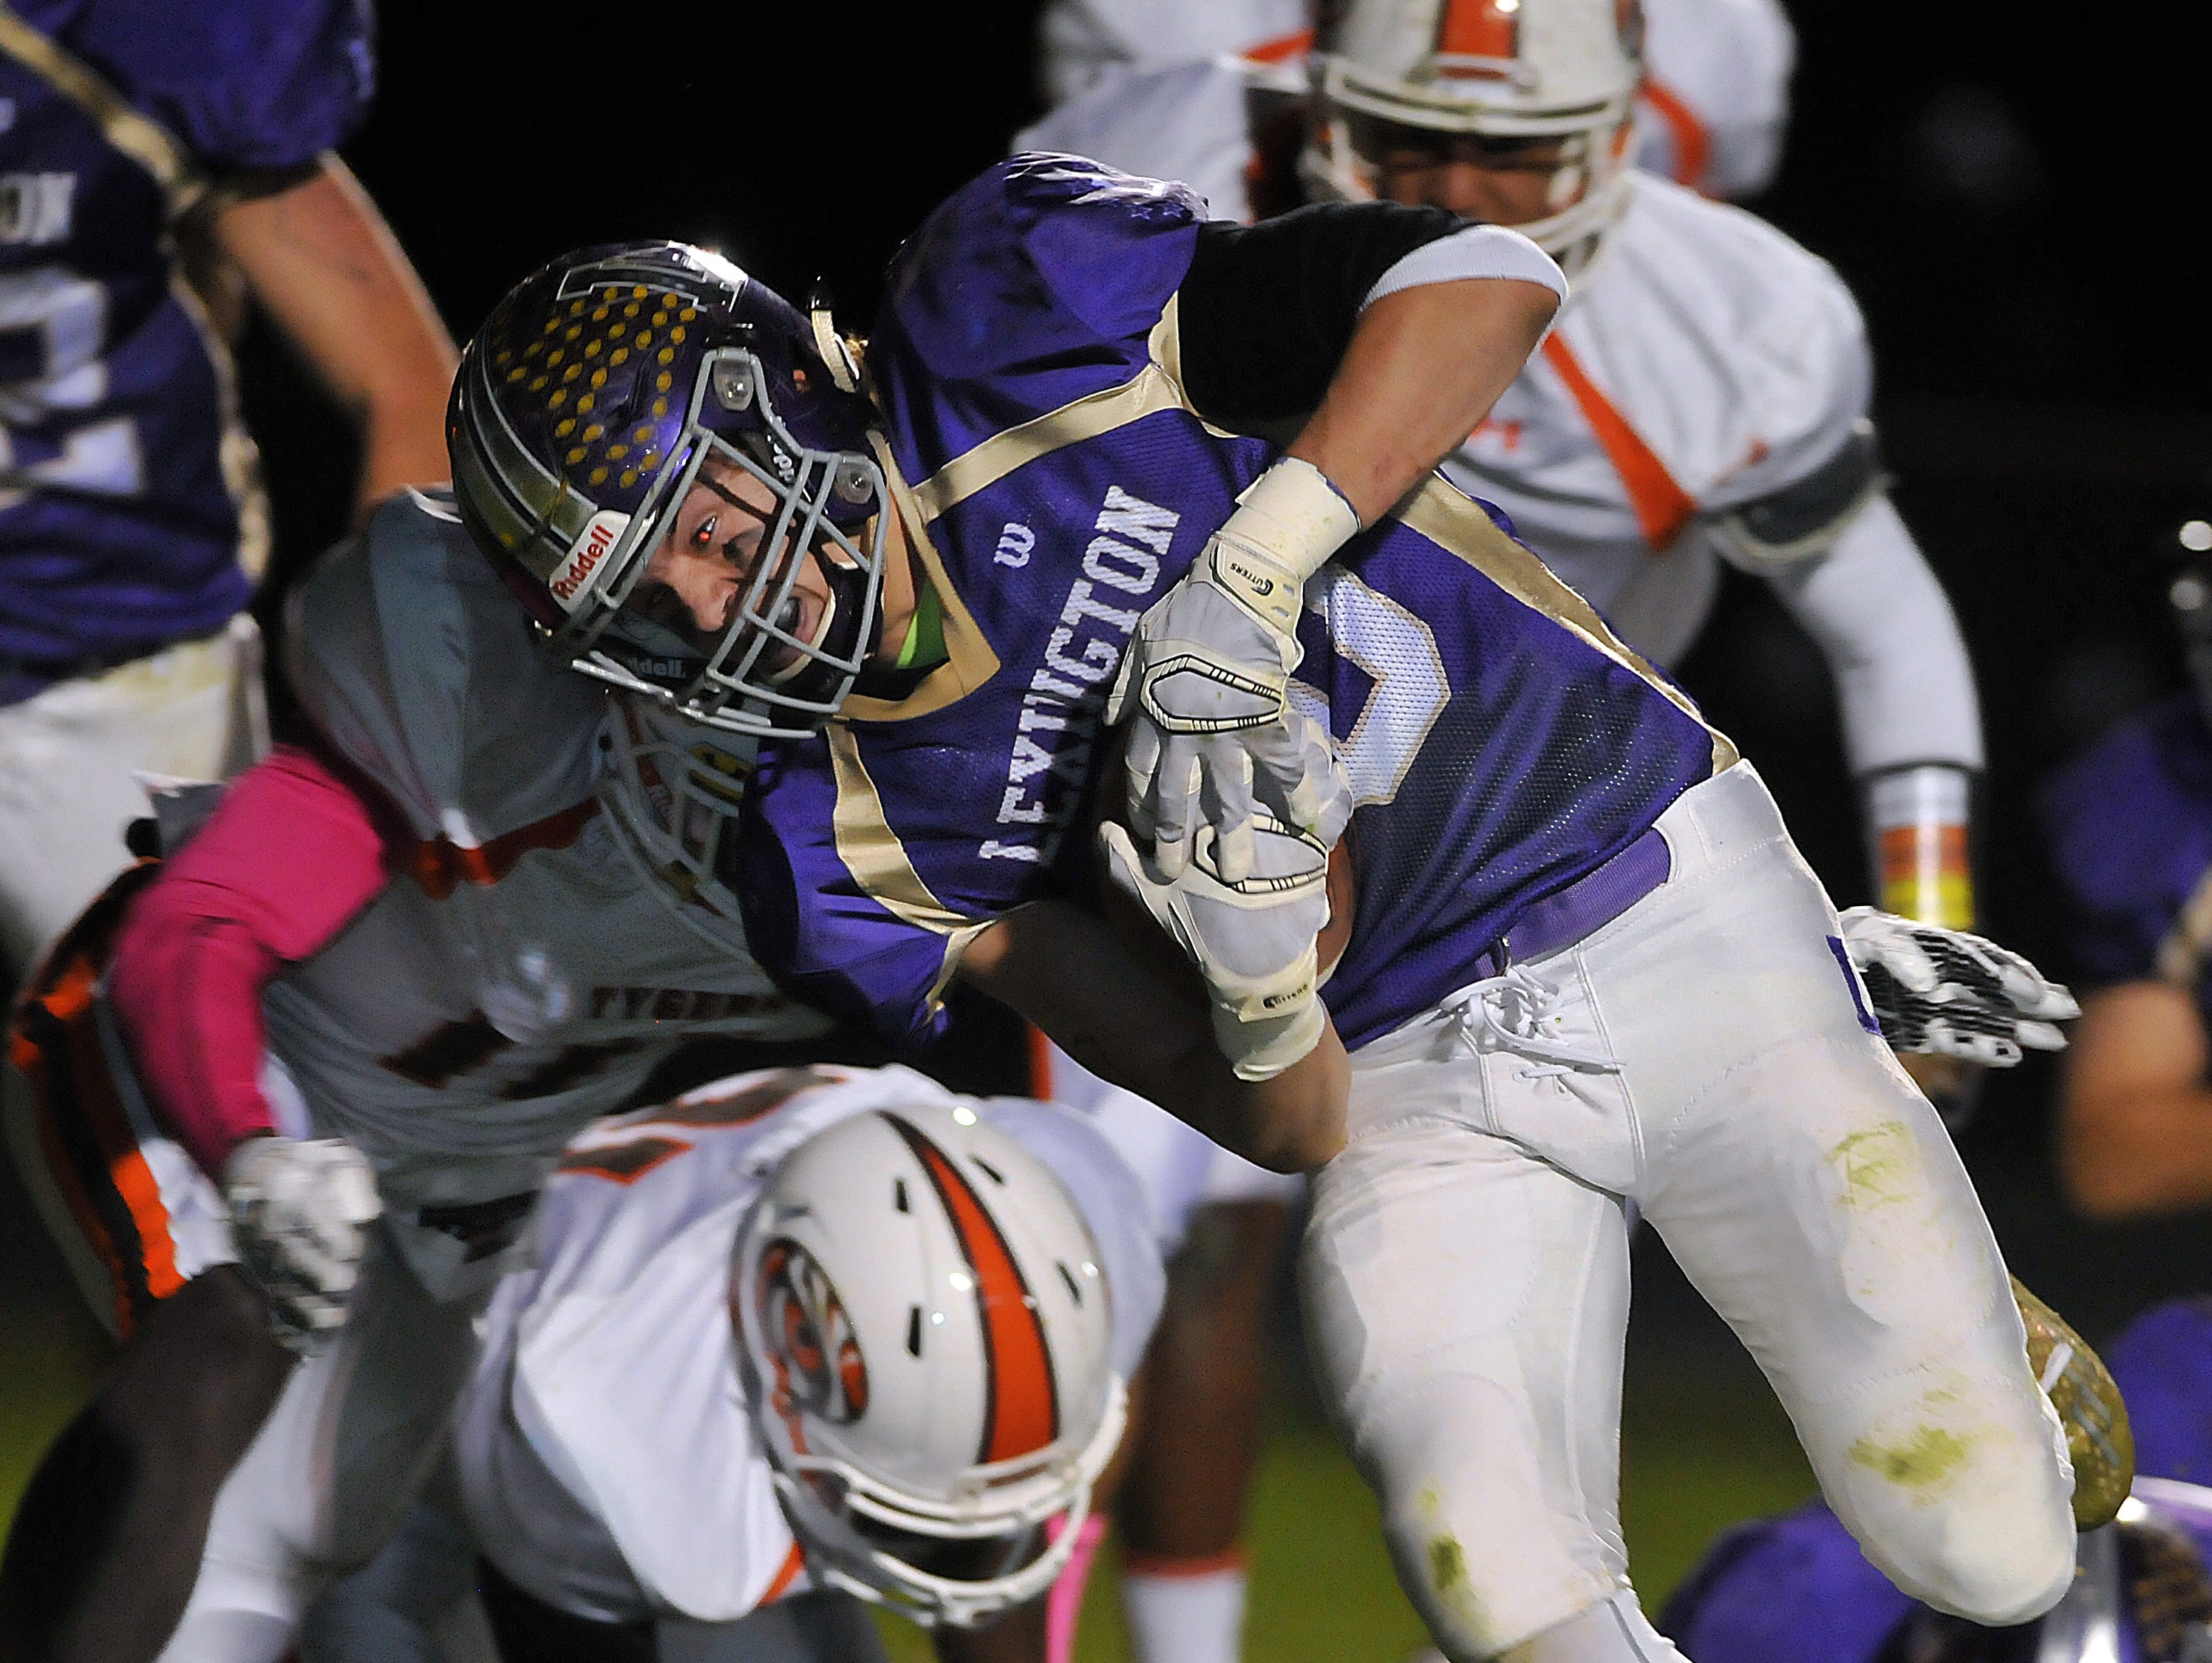 Lexington's Hunter Biddle dives for the end zone during their game Friday night against Mansfield Senior.